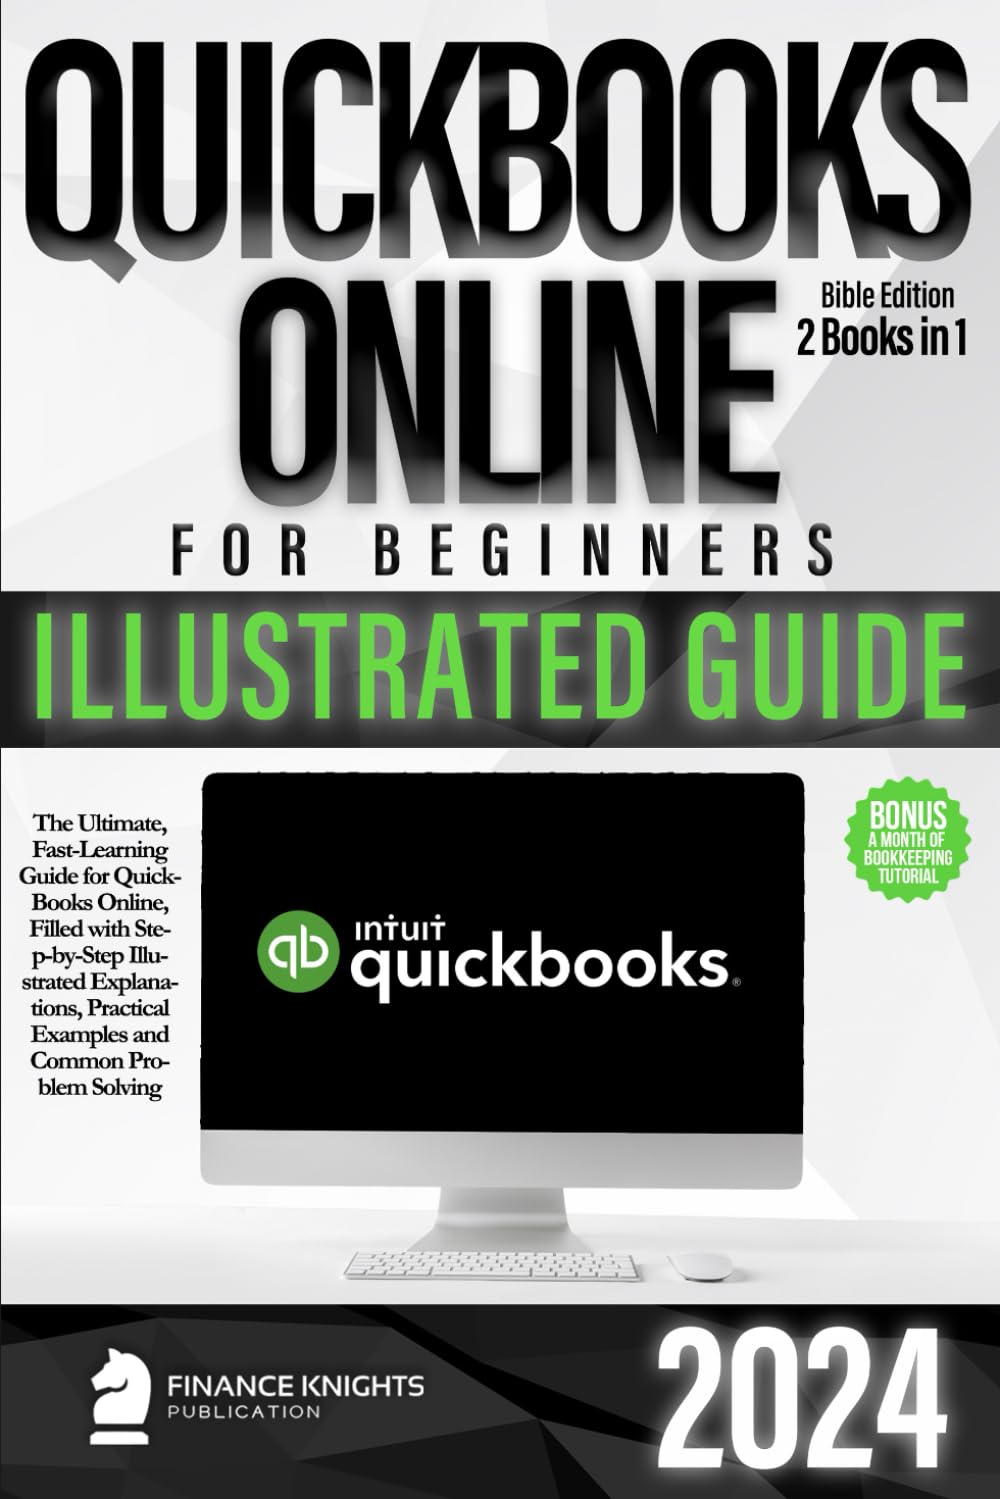 QuickBooks Online for Beginners Bible Edition [2 Books in 1]: The Ultimate Fast Learning Guide for QBO, filled with Step-by-Step Illustrated Explanations, Practical Examples and Common Problem Solving